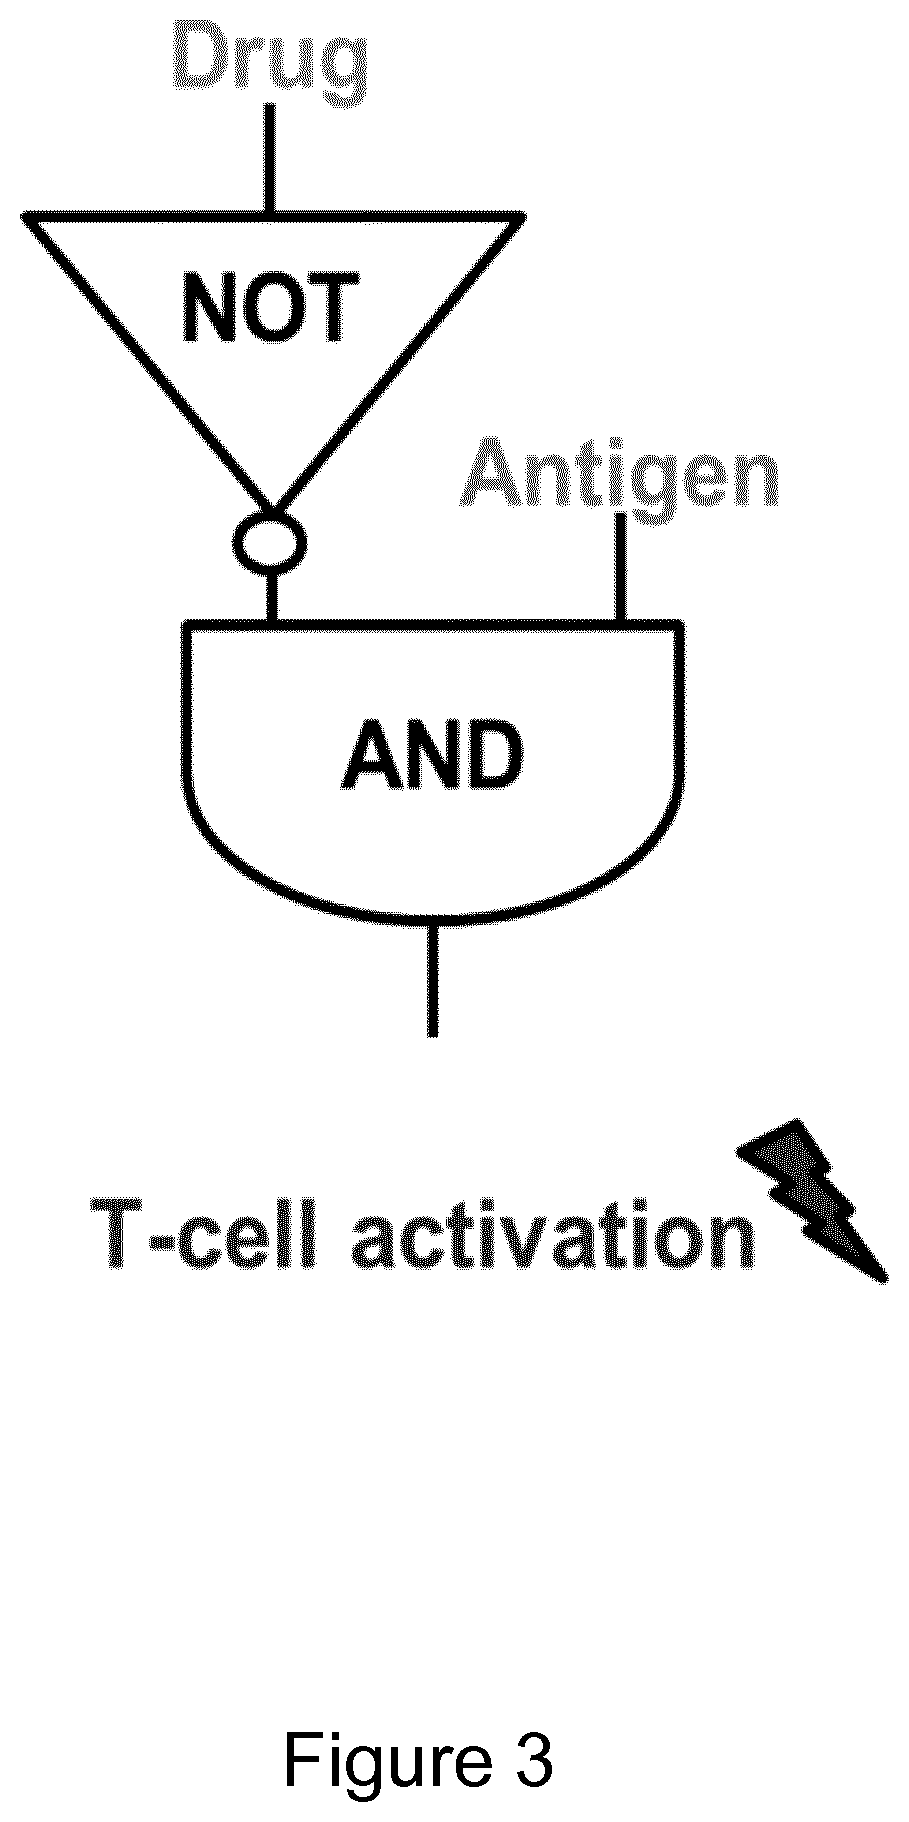 Protease based switch chimeric antigen receptors for safer cell immunotherapy